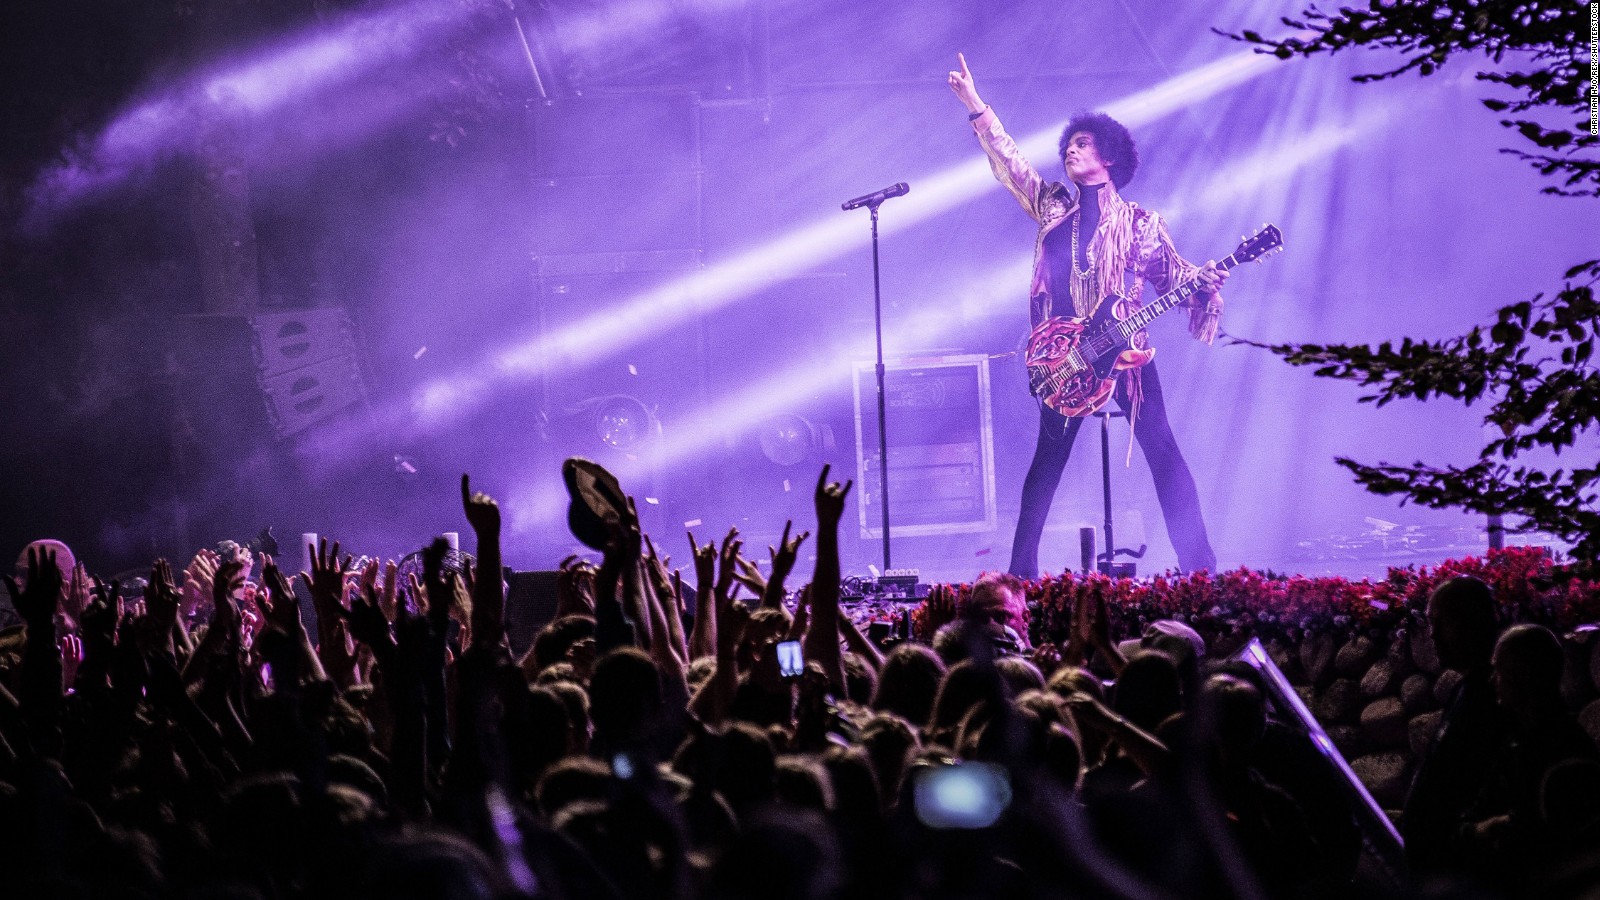 Mandatory Credit: Photo by Gonzales Photo/Christian Hjo/REX/Shutterstock (3609461a)
The American pop star Prince is pointing at the stars while performing his live show at the Danish music festival Skanderborg Festival 2013. Denmark 2013.
STOCK

